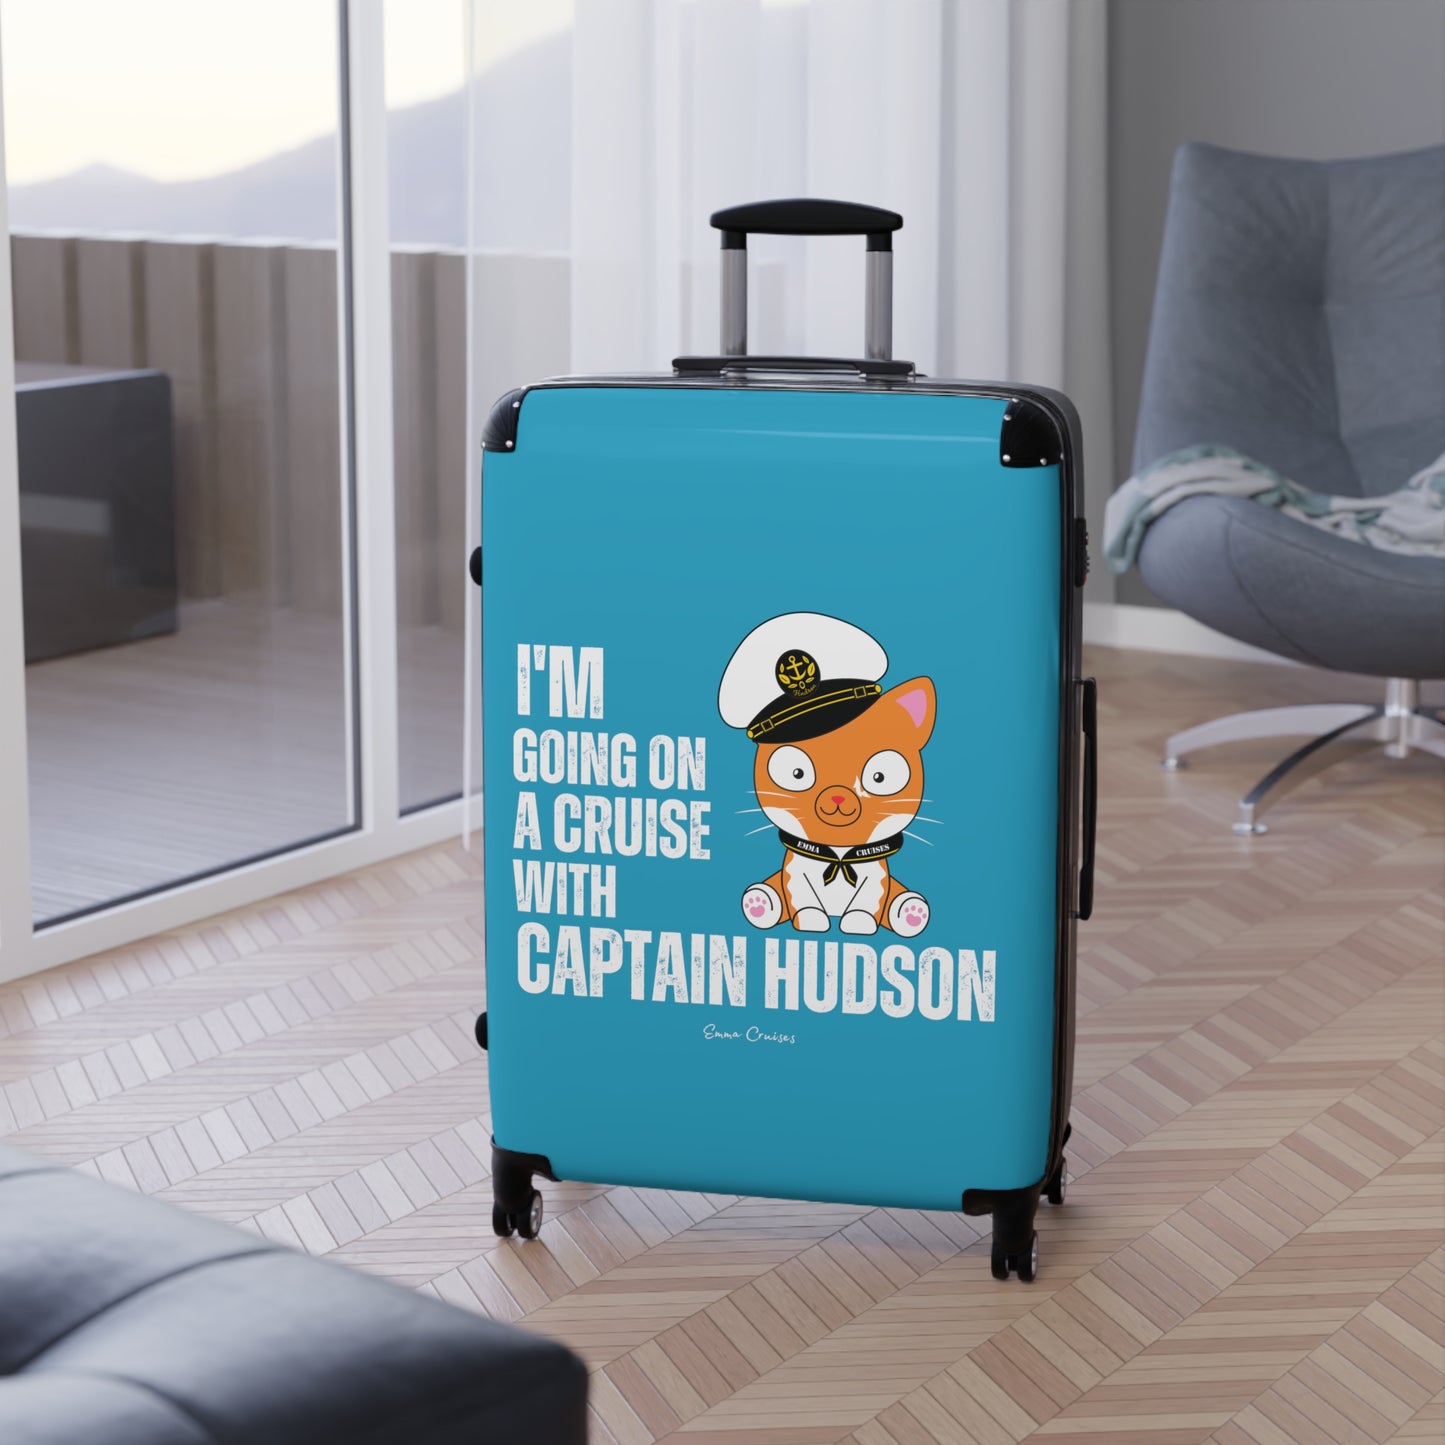 I'm Going on a Cruise With Captain Hudson - Suitcase